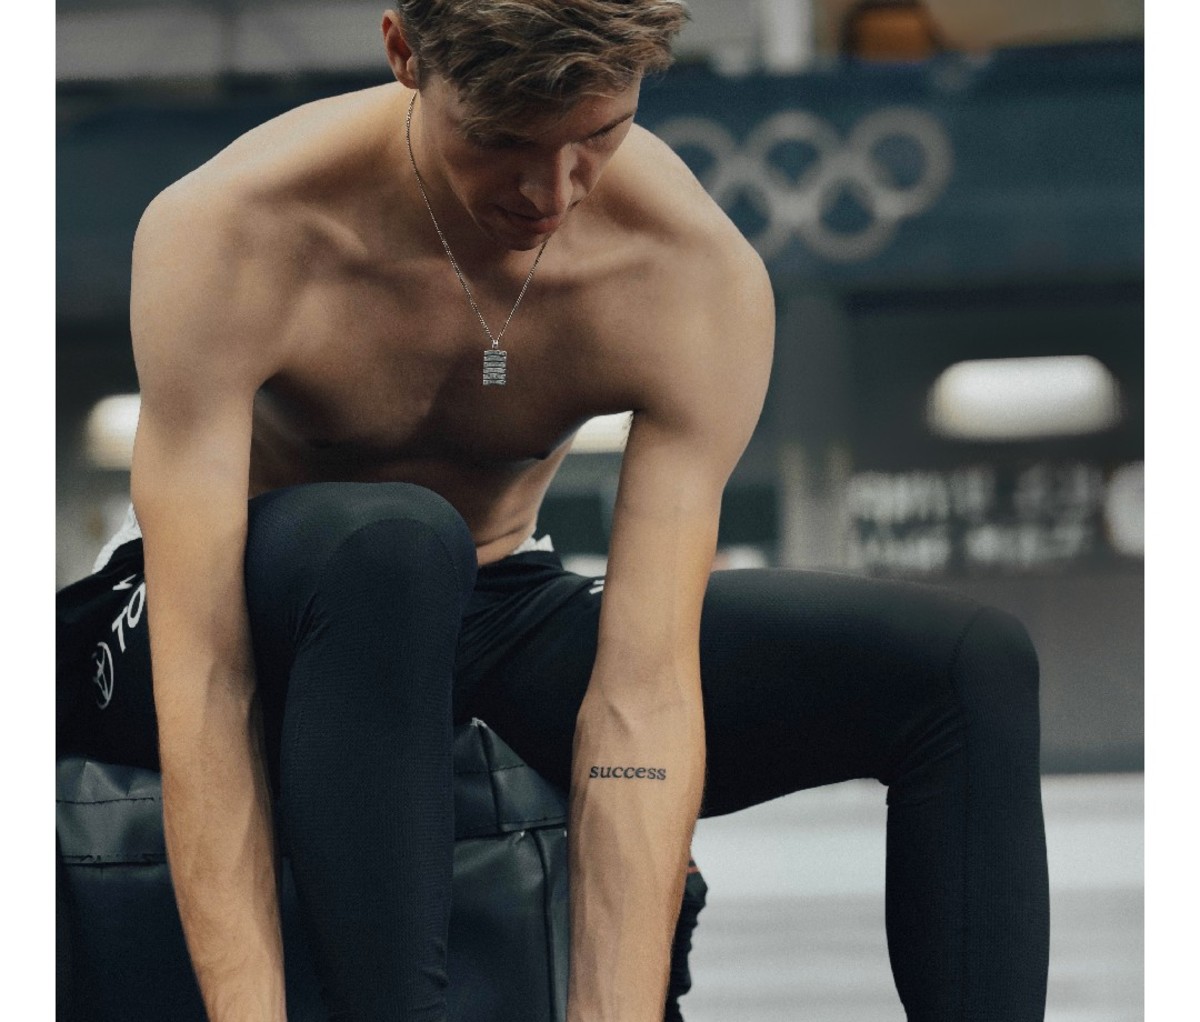 Team USA speed skater Conor McDermott-Mostowy shirtless with 